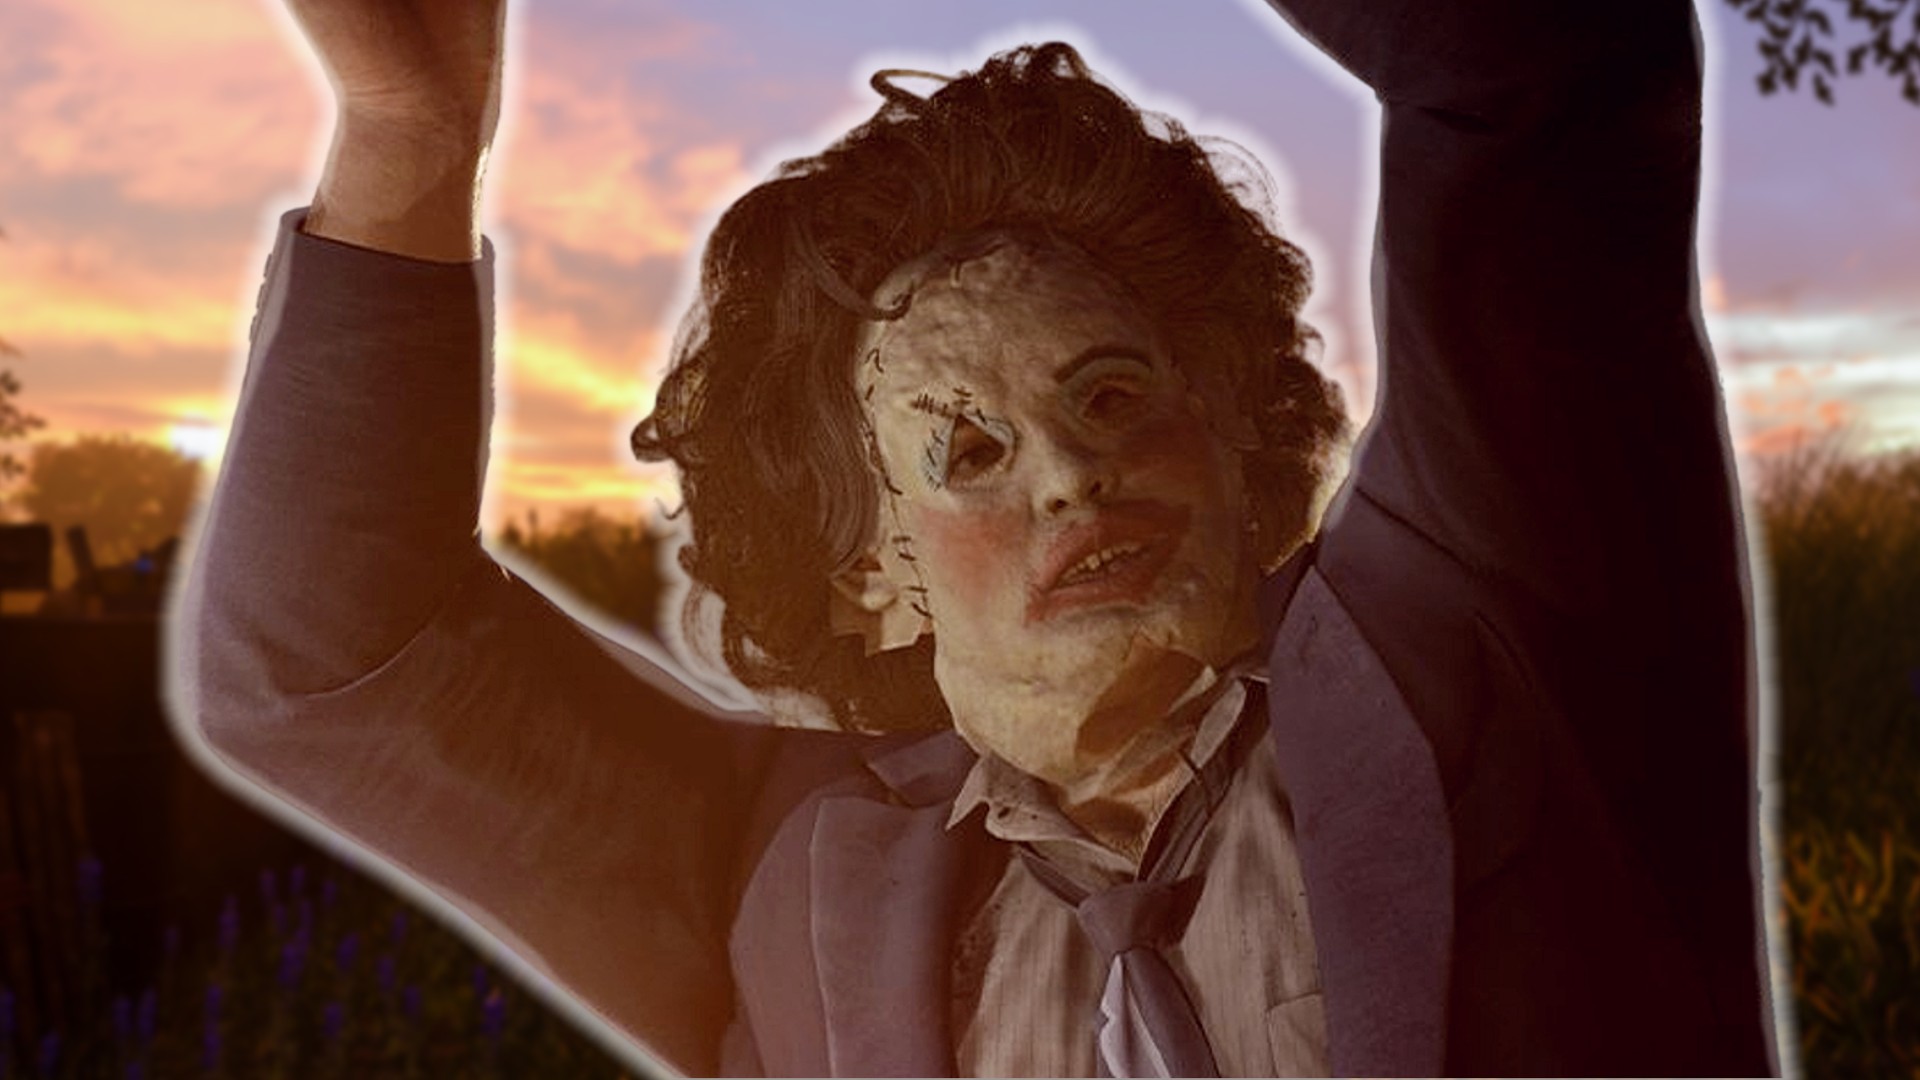 The Texas Chain Saw Massacre adds canonical Leatherface origin story